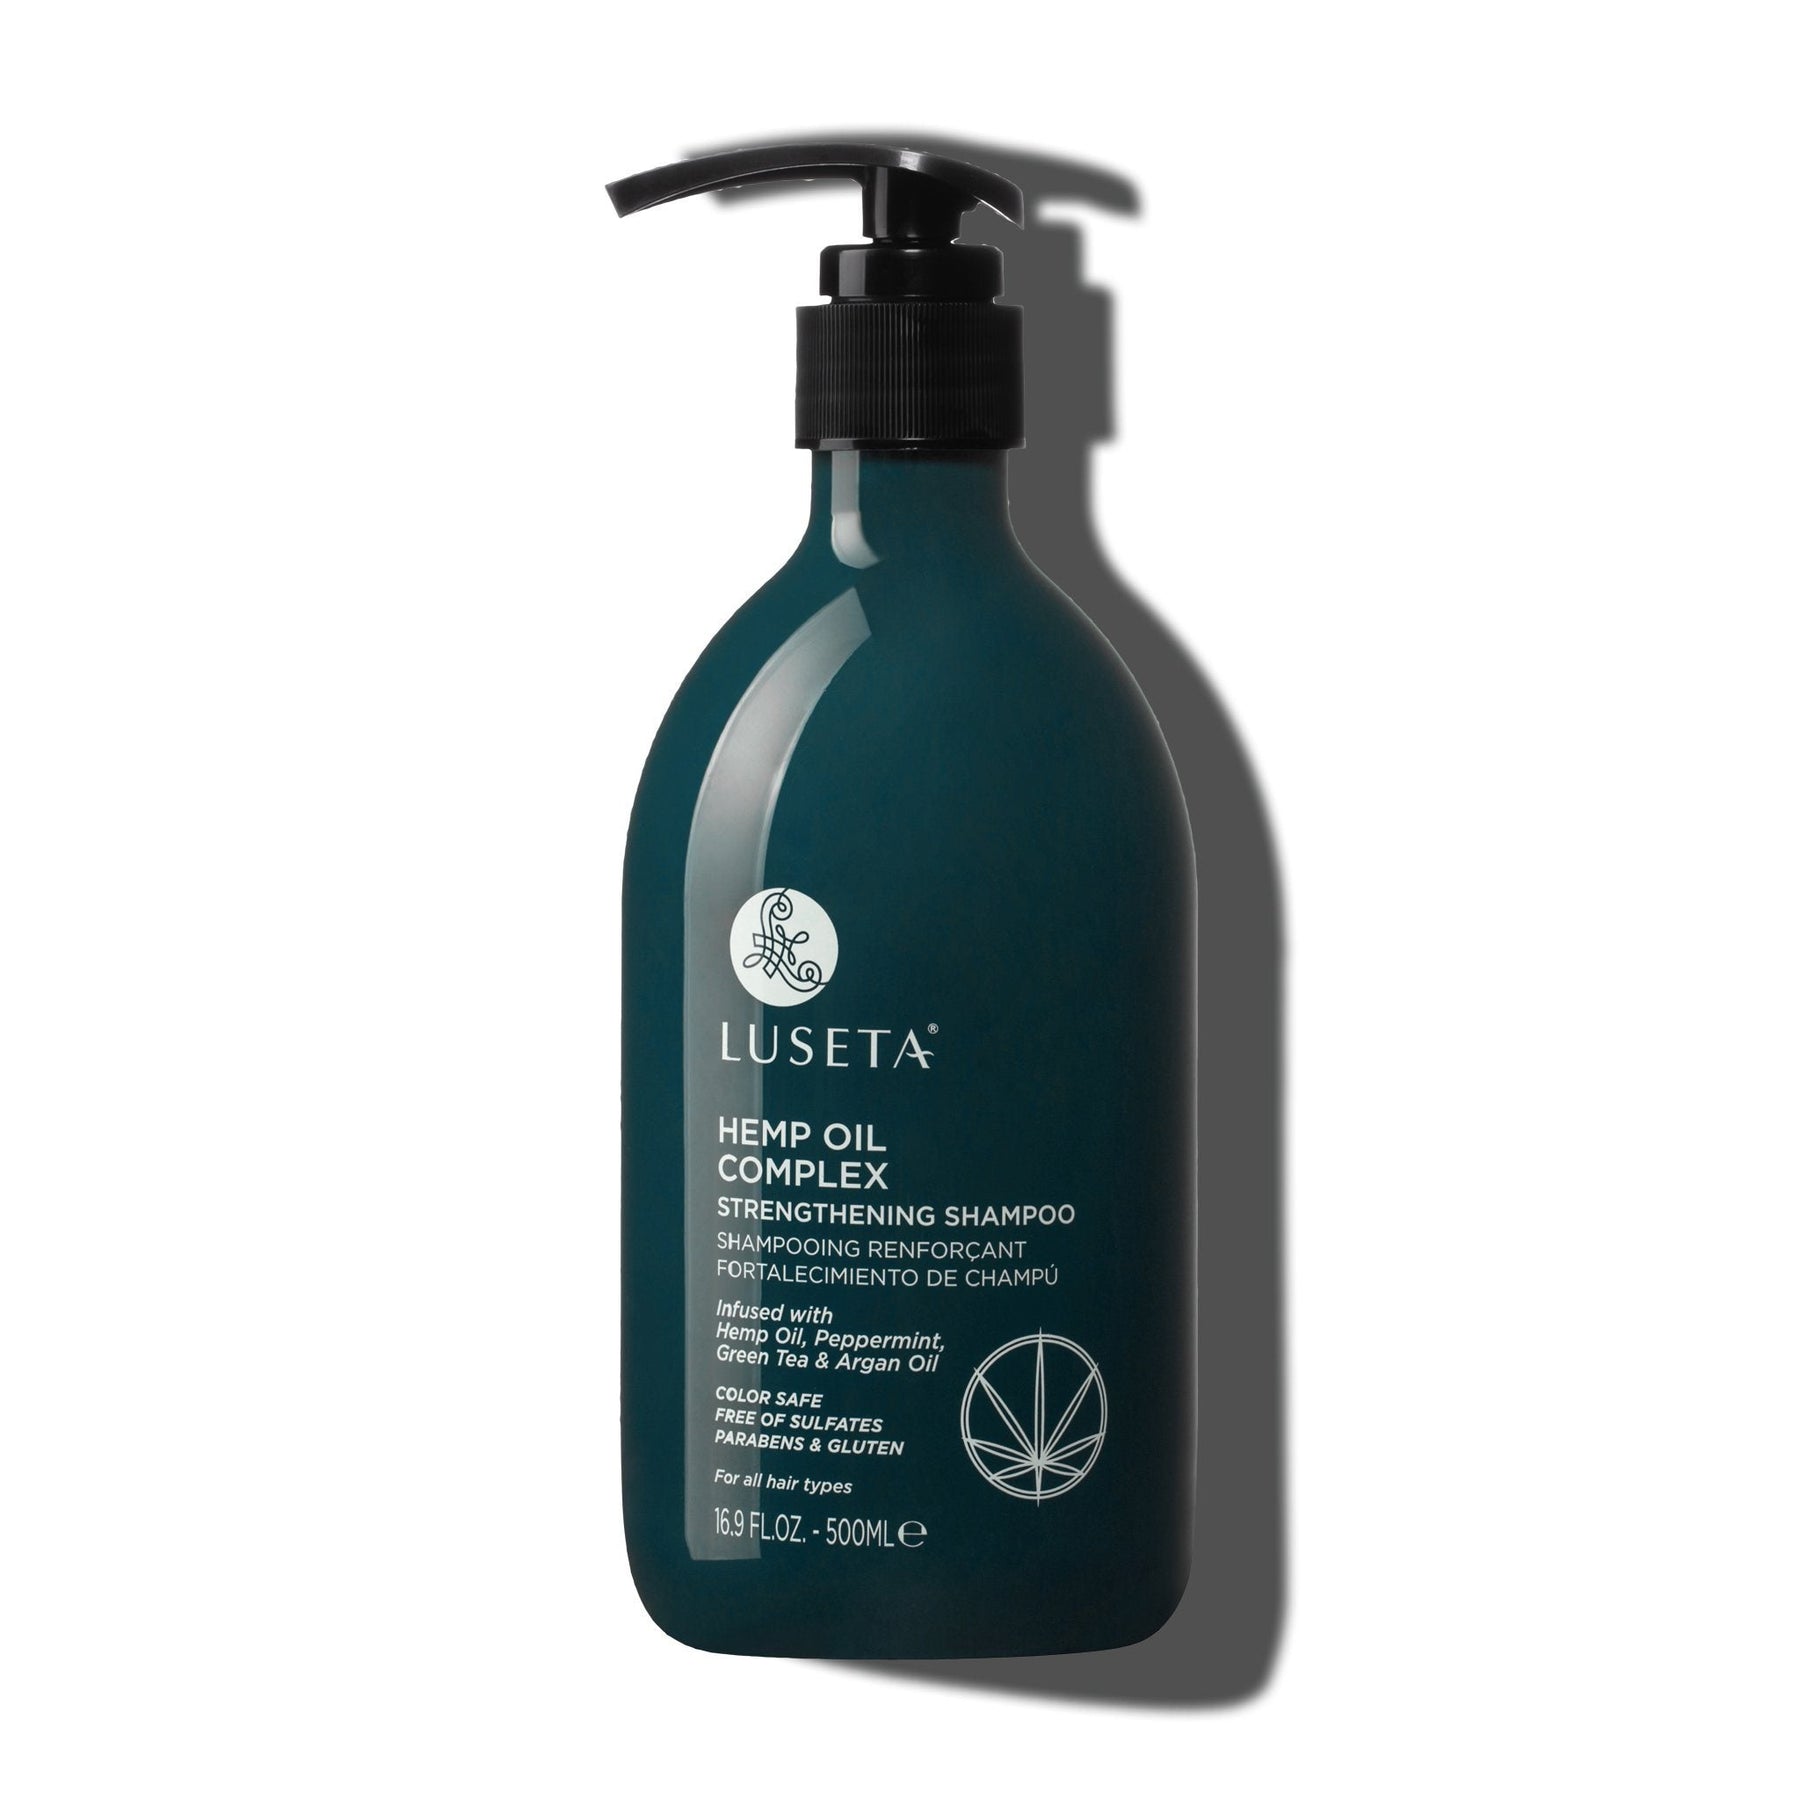 Hemp Oil Complex Strengthening Shampoo - by Luseta Beauty |ProCare Outlet|